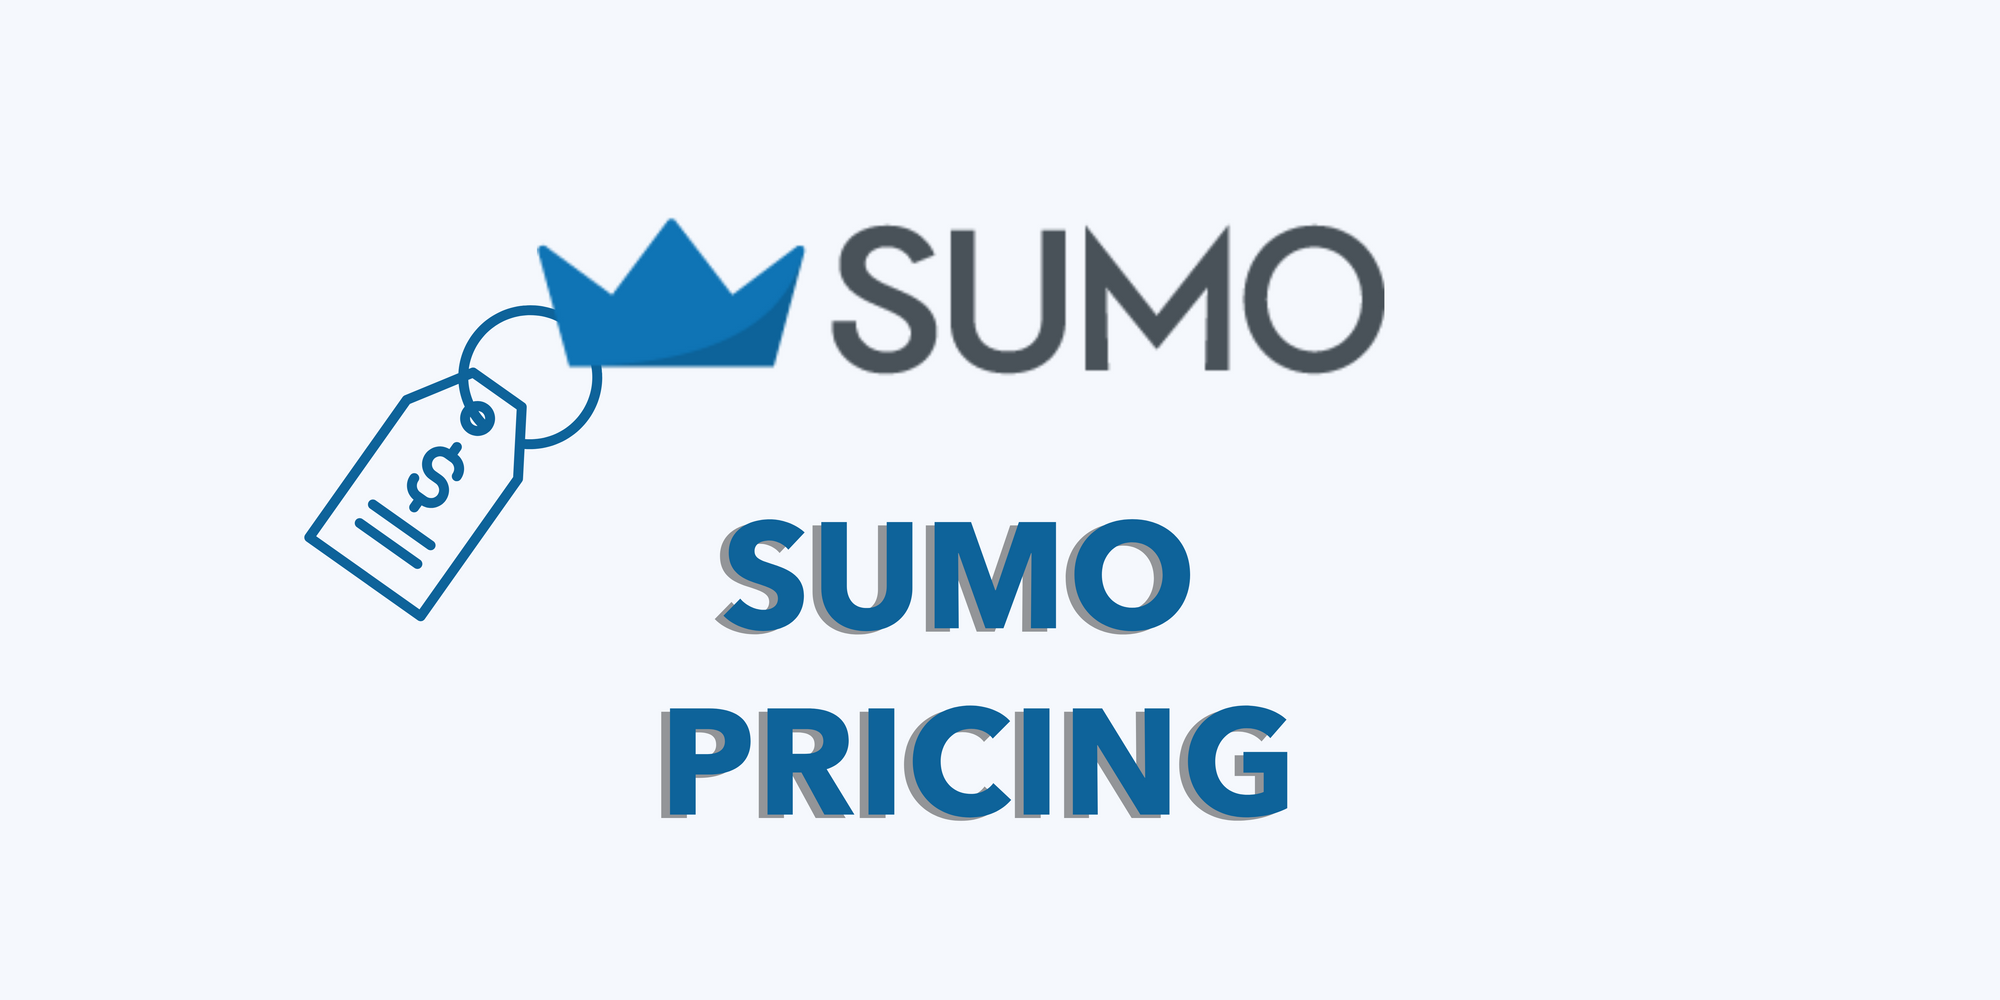 Sumo icon with price icon to emphasize the pricing plans on blue background